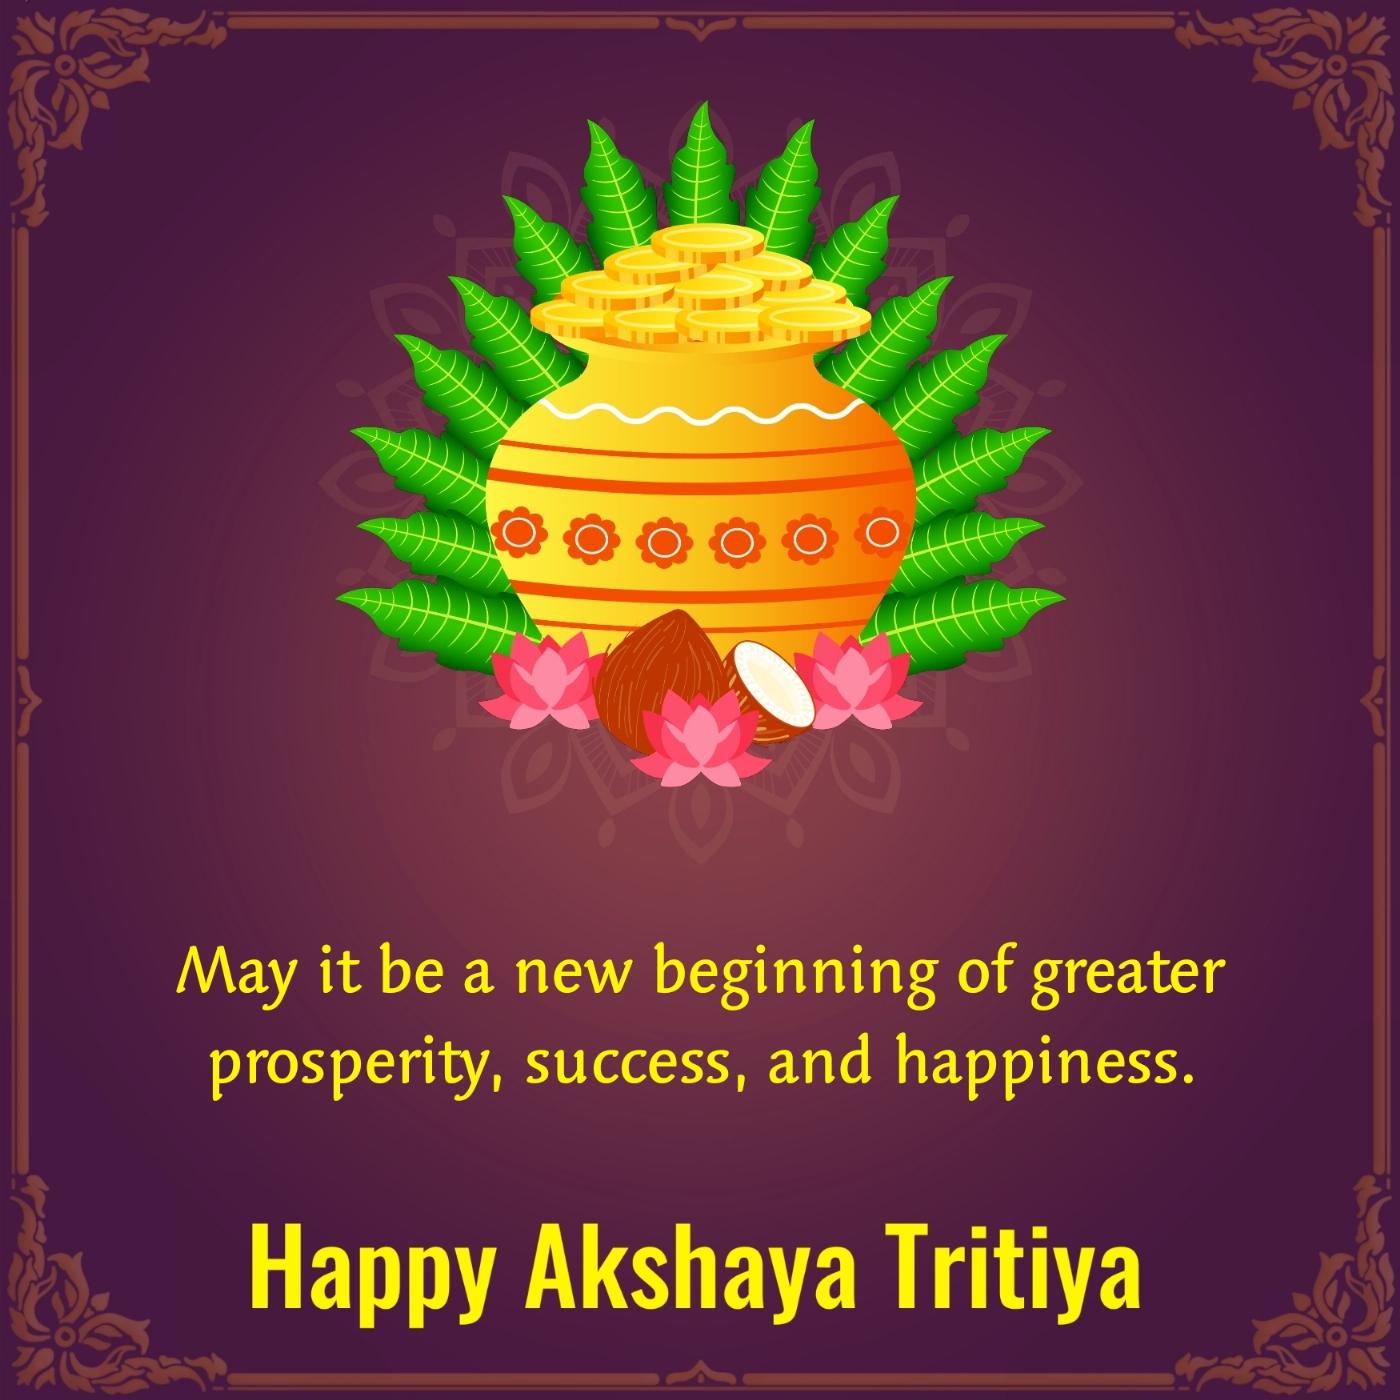 May it be a new beginning of greater prosperity success and happiness